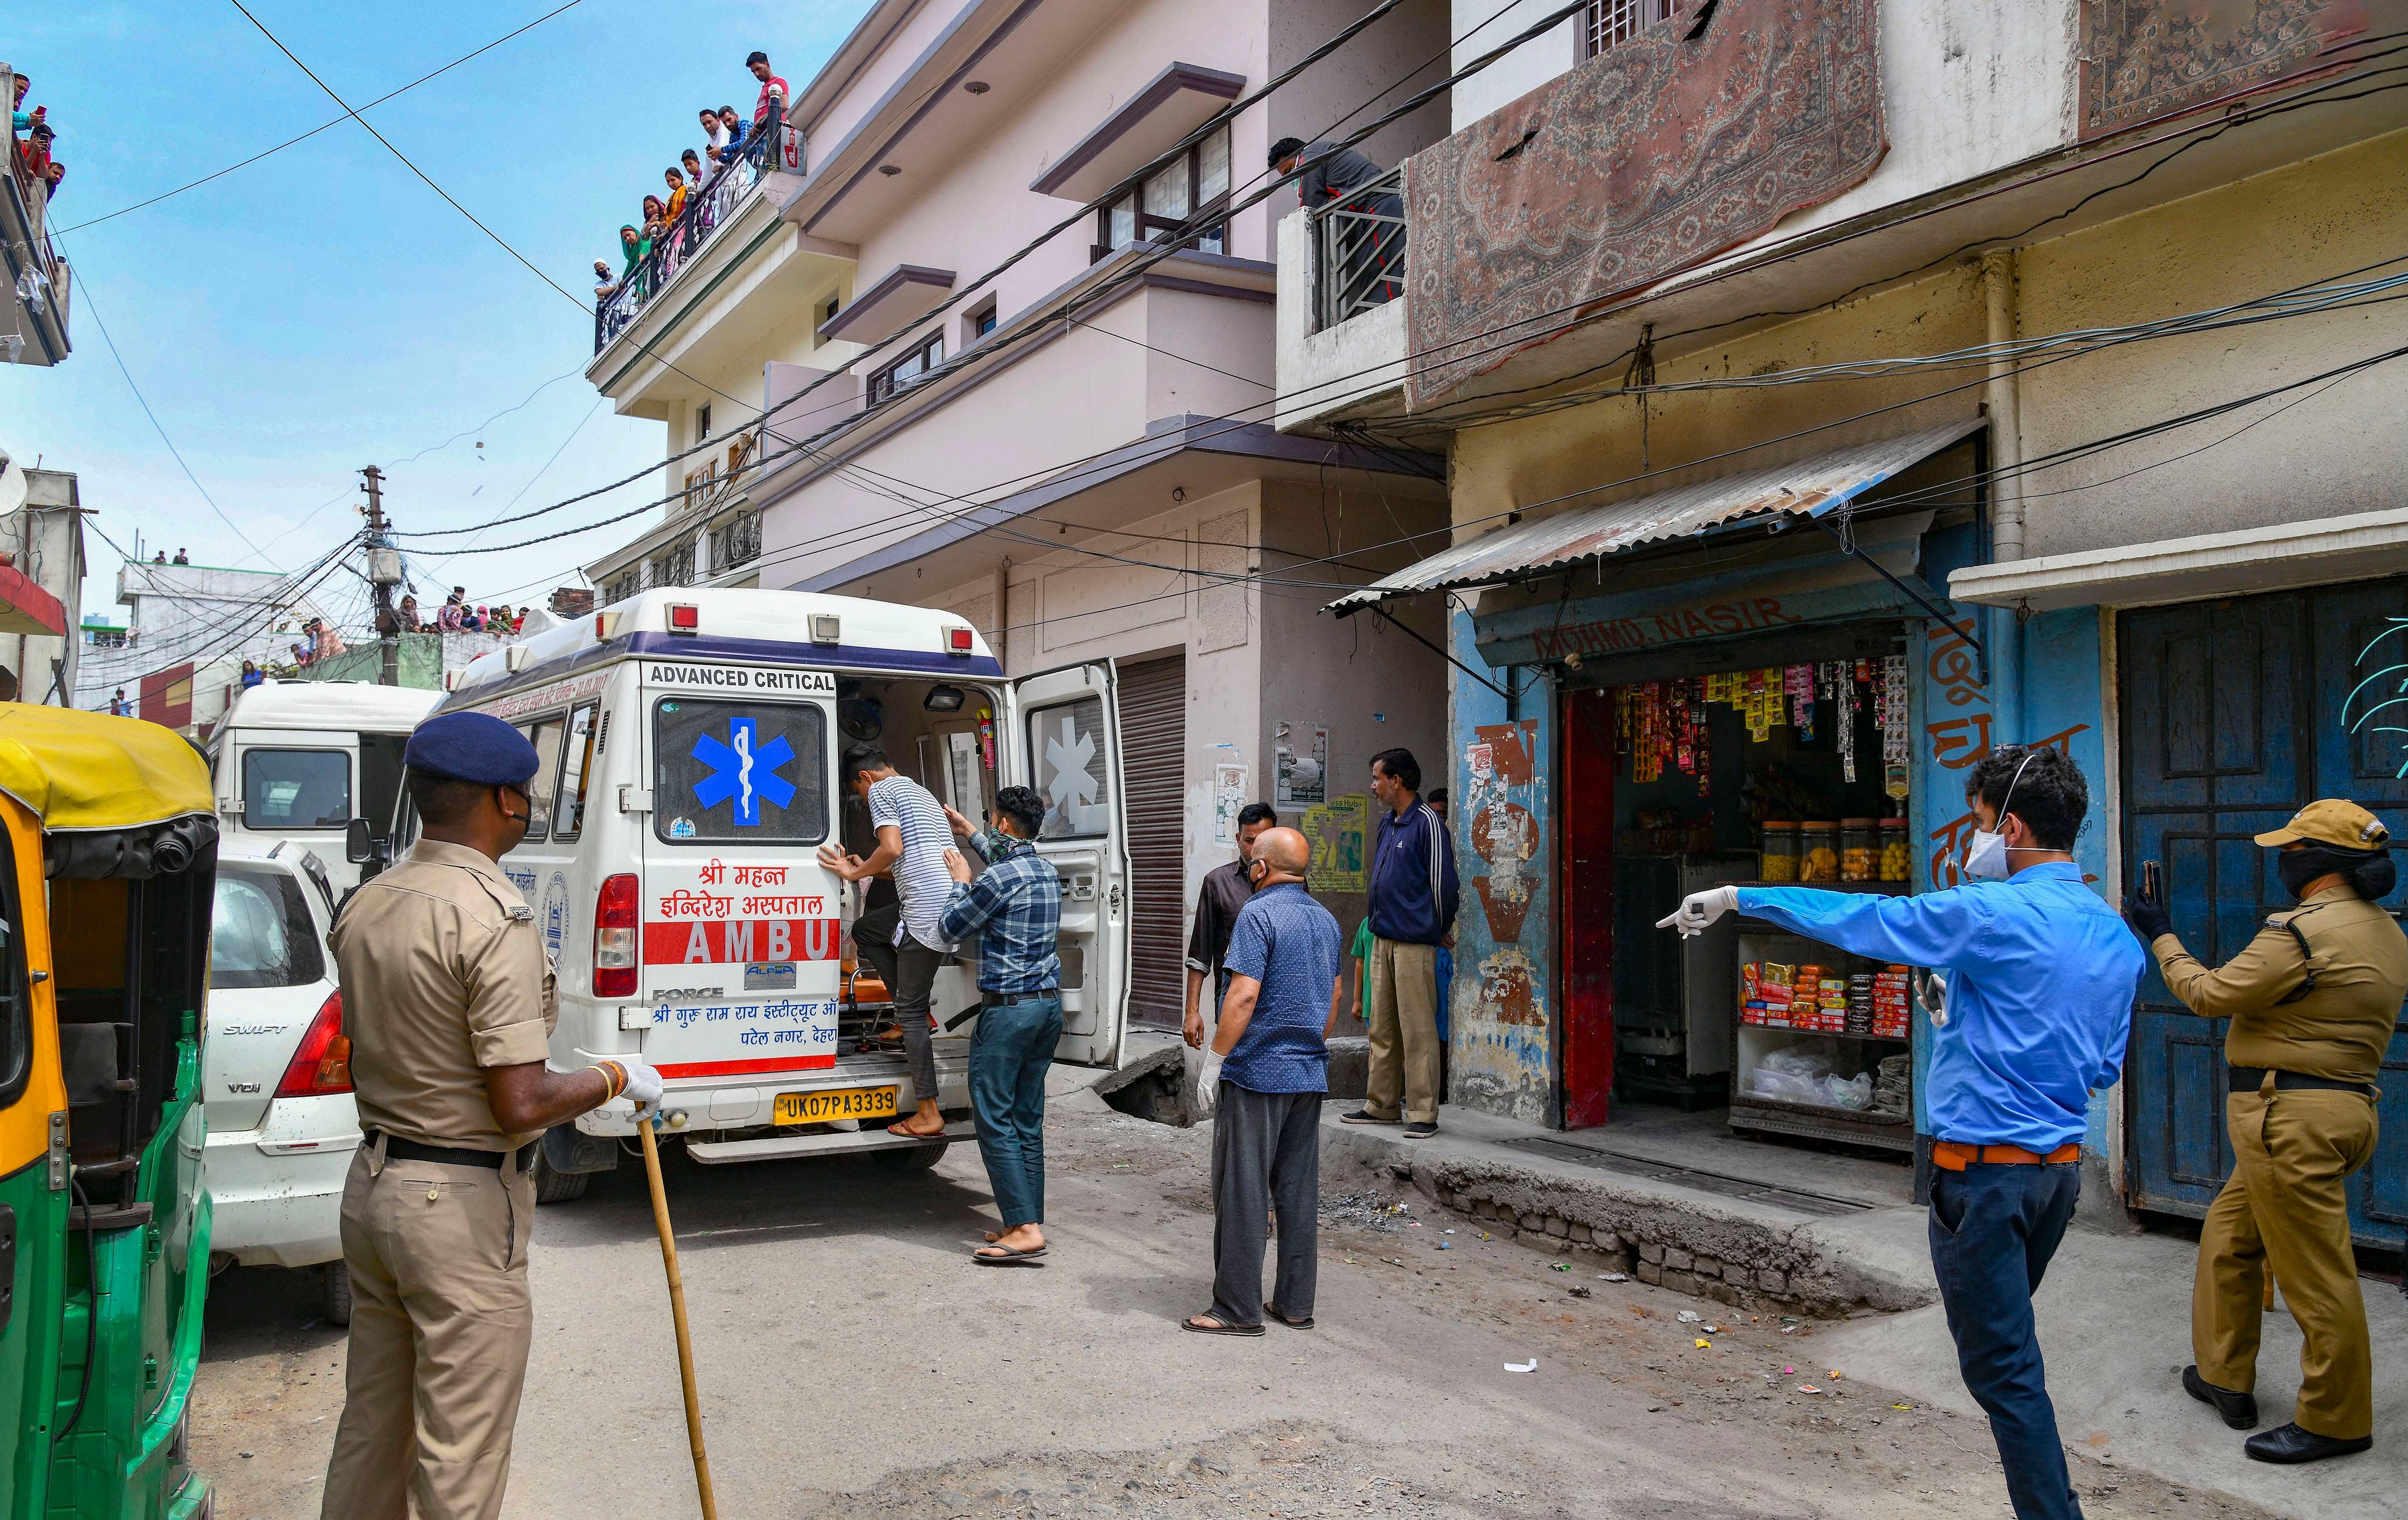 Police and medical workers take family members of a 'muezzin' (who recites prayer-call at mosques) for quarantine after he was detected COVID-19 positive, in Dehradun. (Credit: PTI Photo)